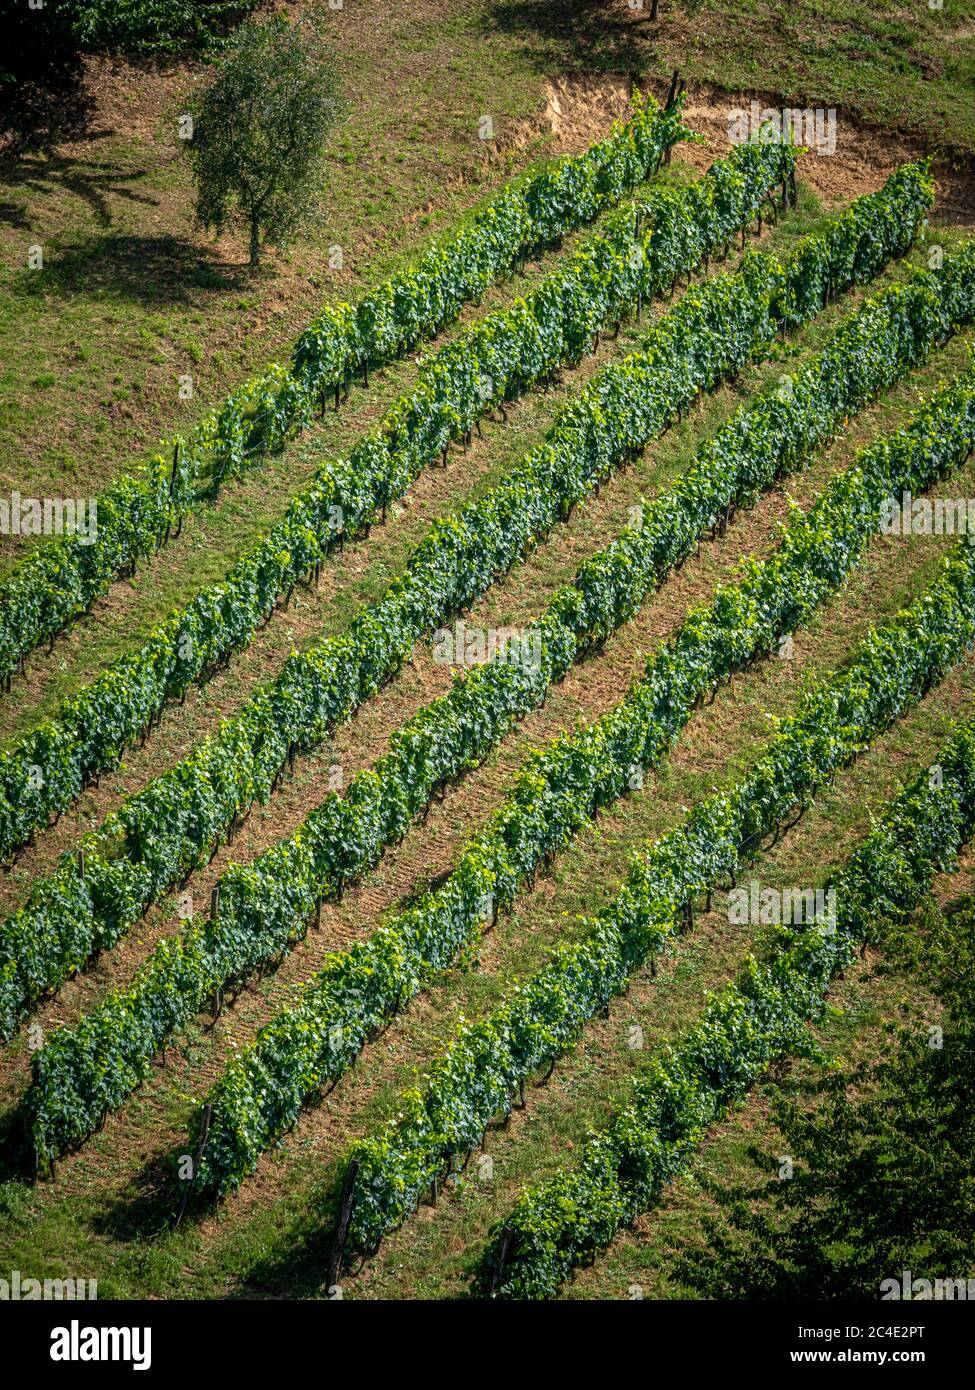 Grapevines growing on a steep hillside in Siena. Italy Stock Photo